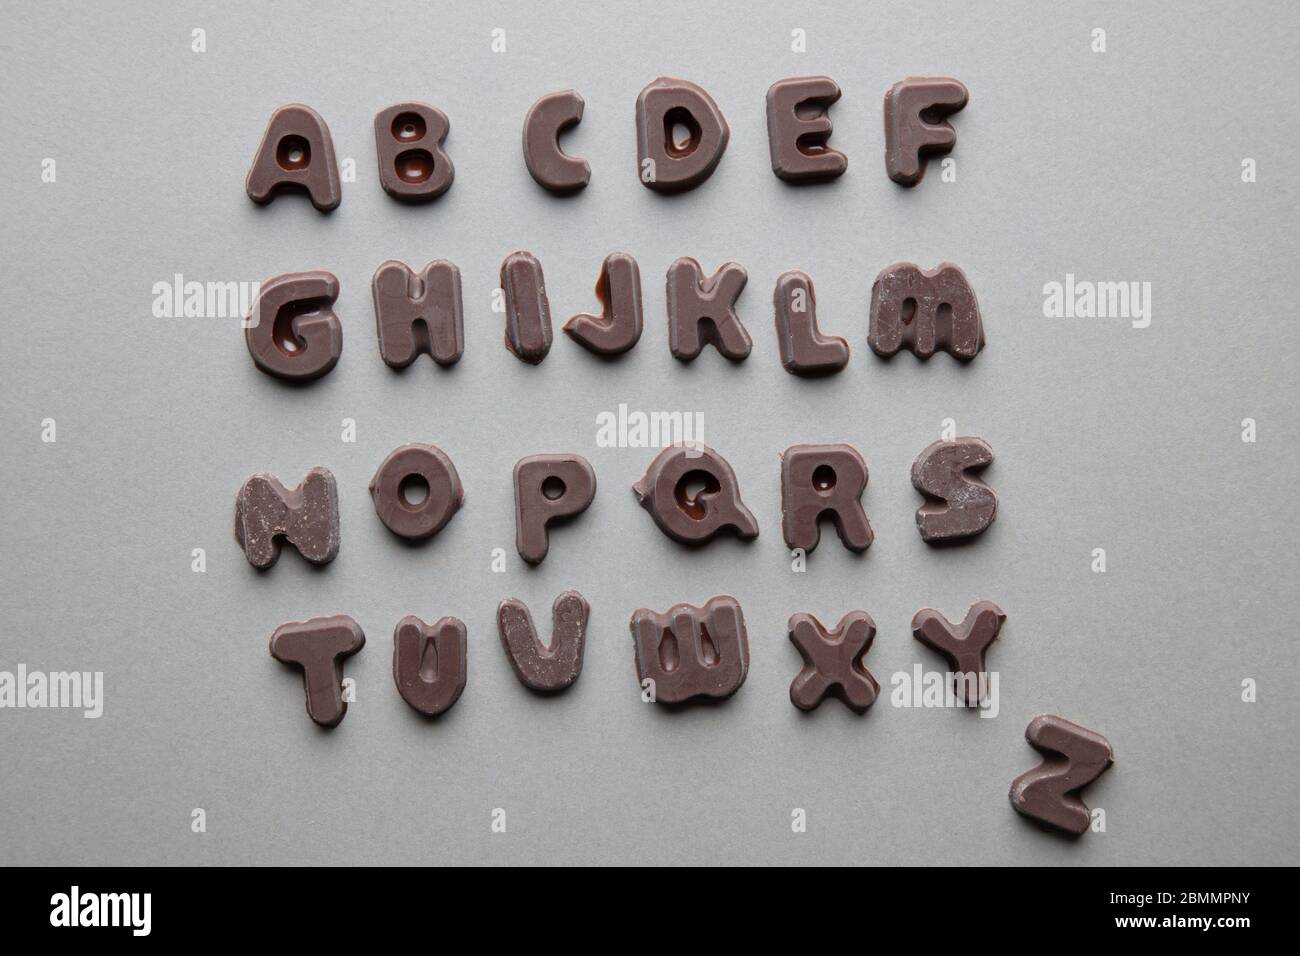 an artsy studio shot of chocolate letters in alphabetical order against a grey background Stock Photo